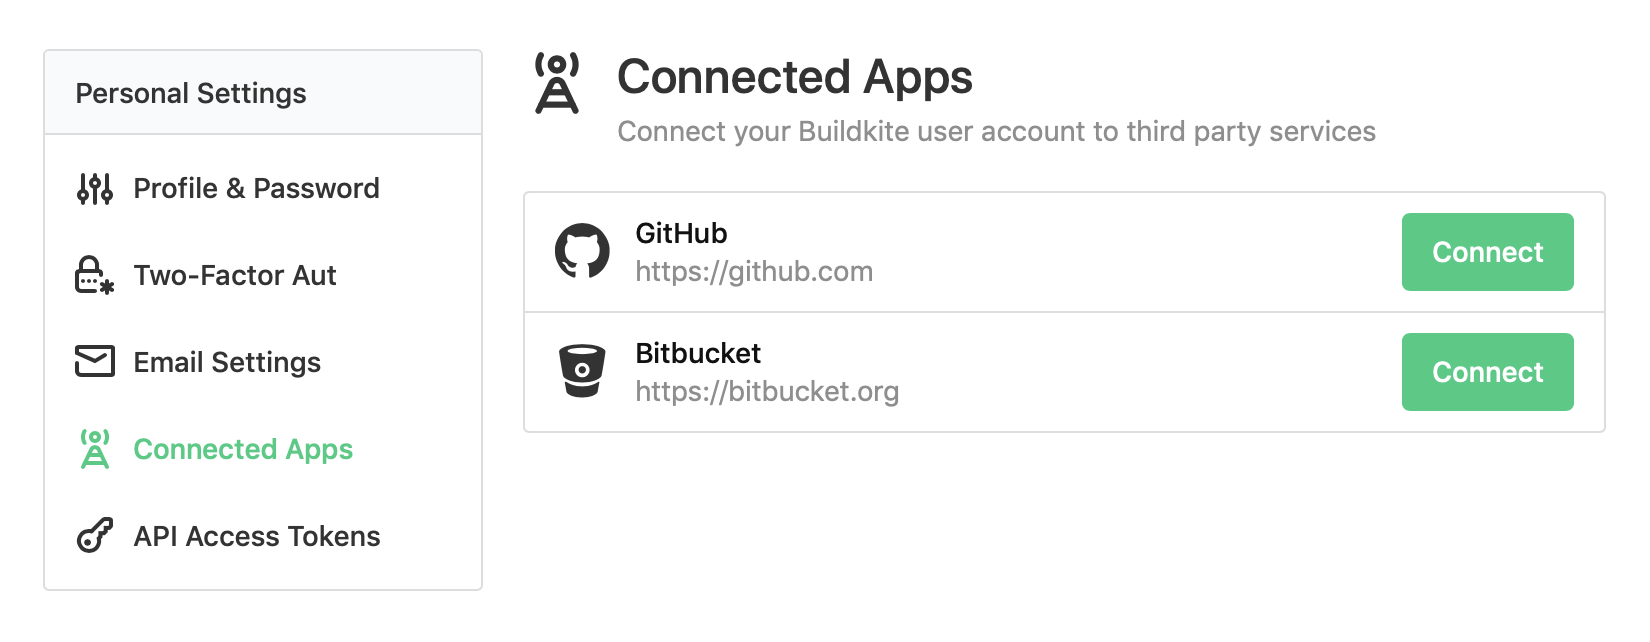 Screenshot of the Buildkite Connected Apps screen